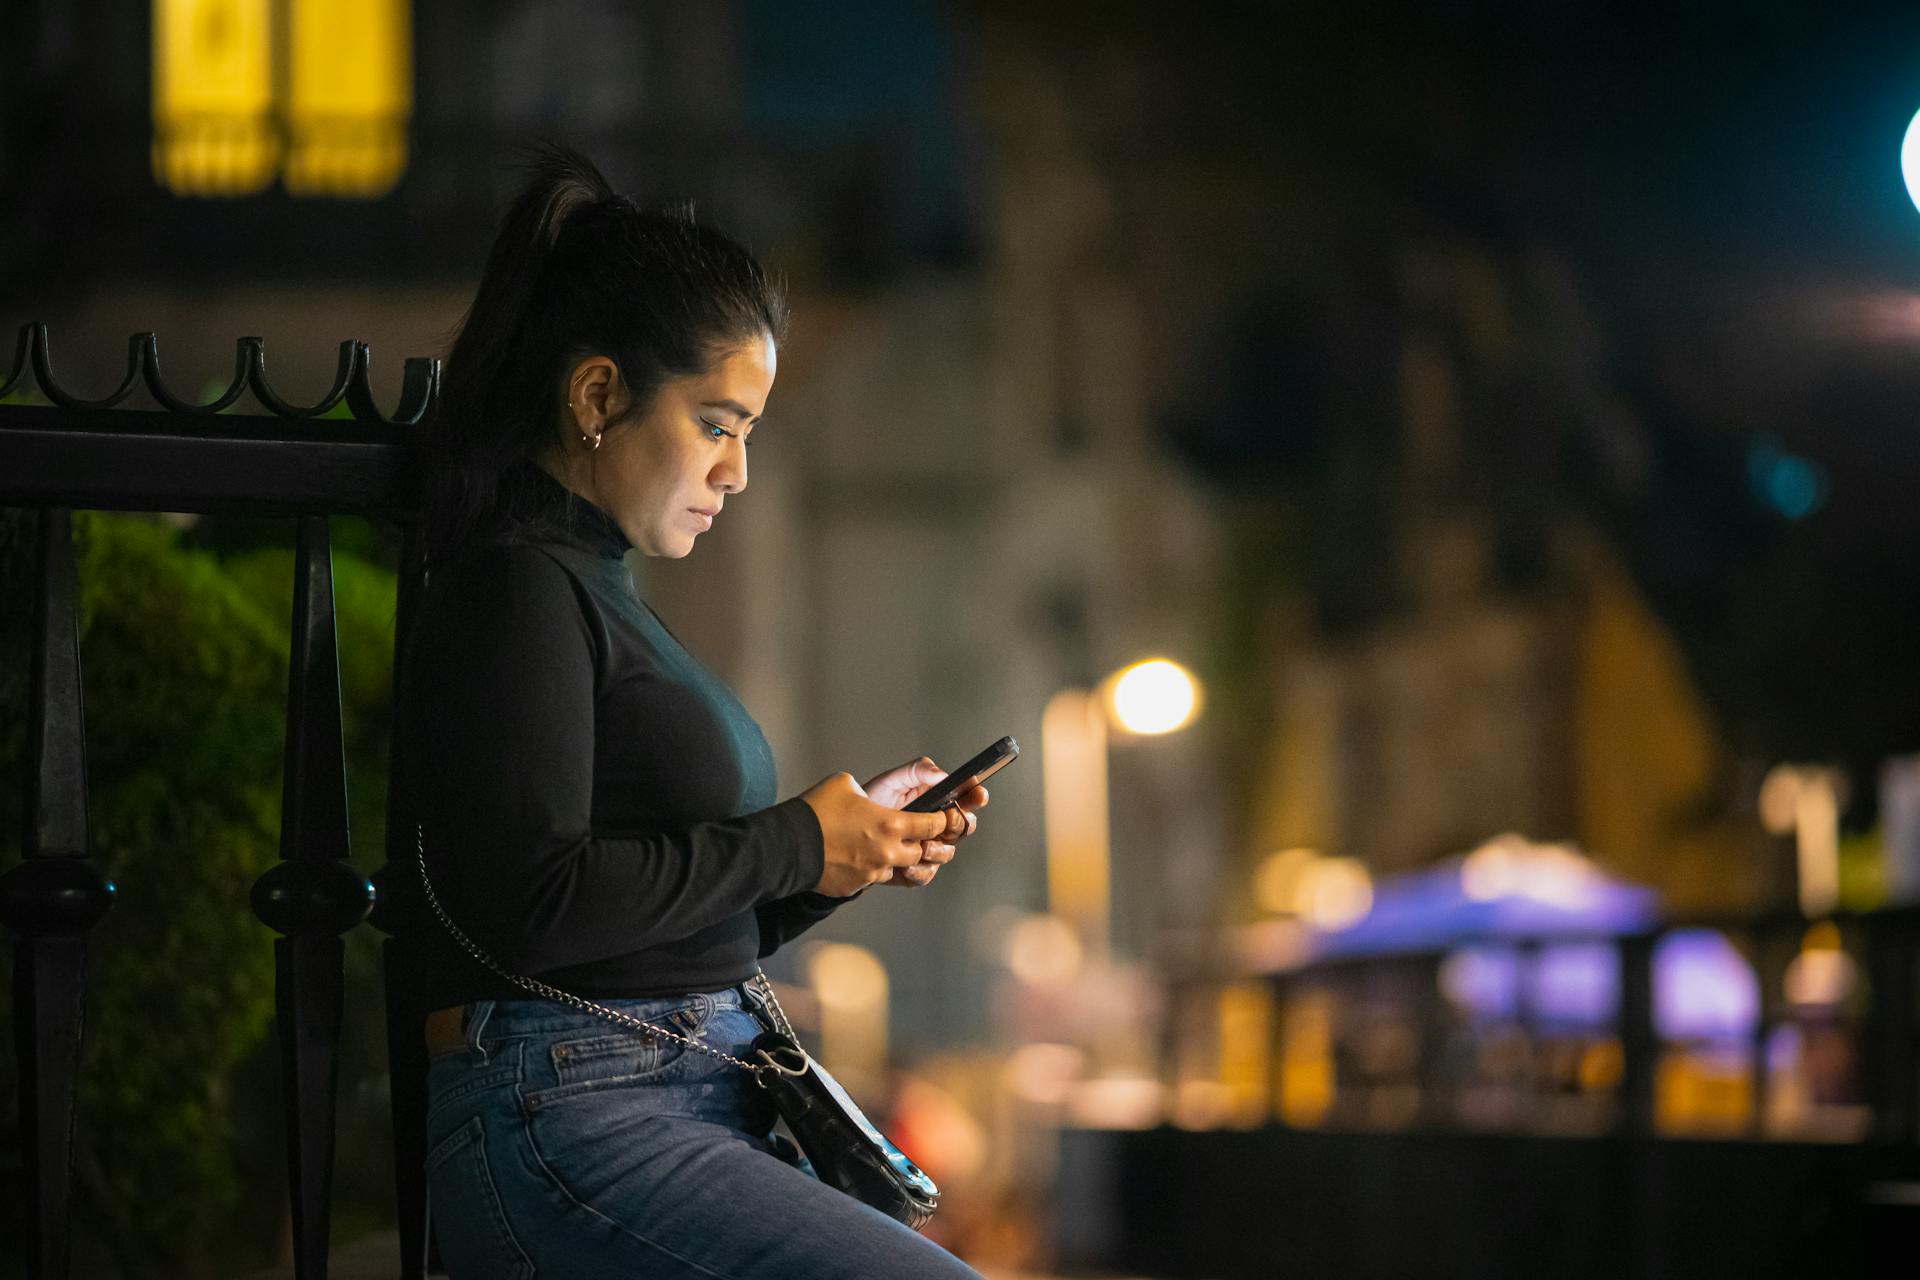 A woman holding a phone at night | Source: Pexels